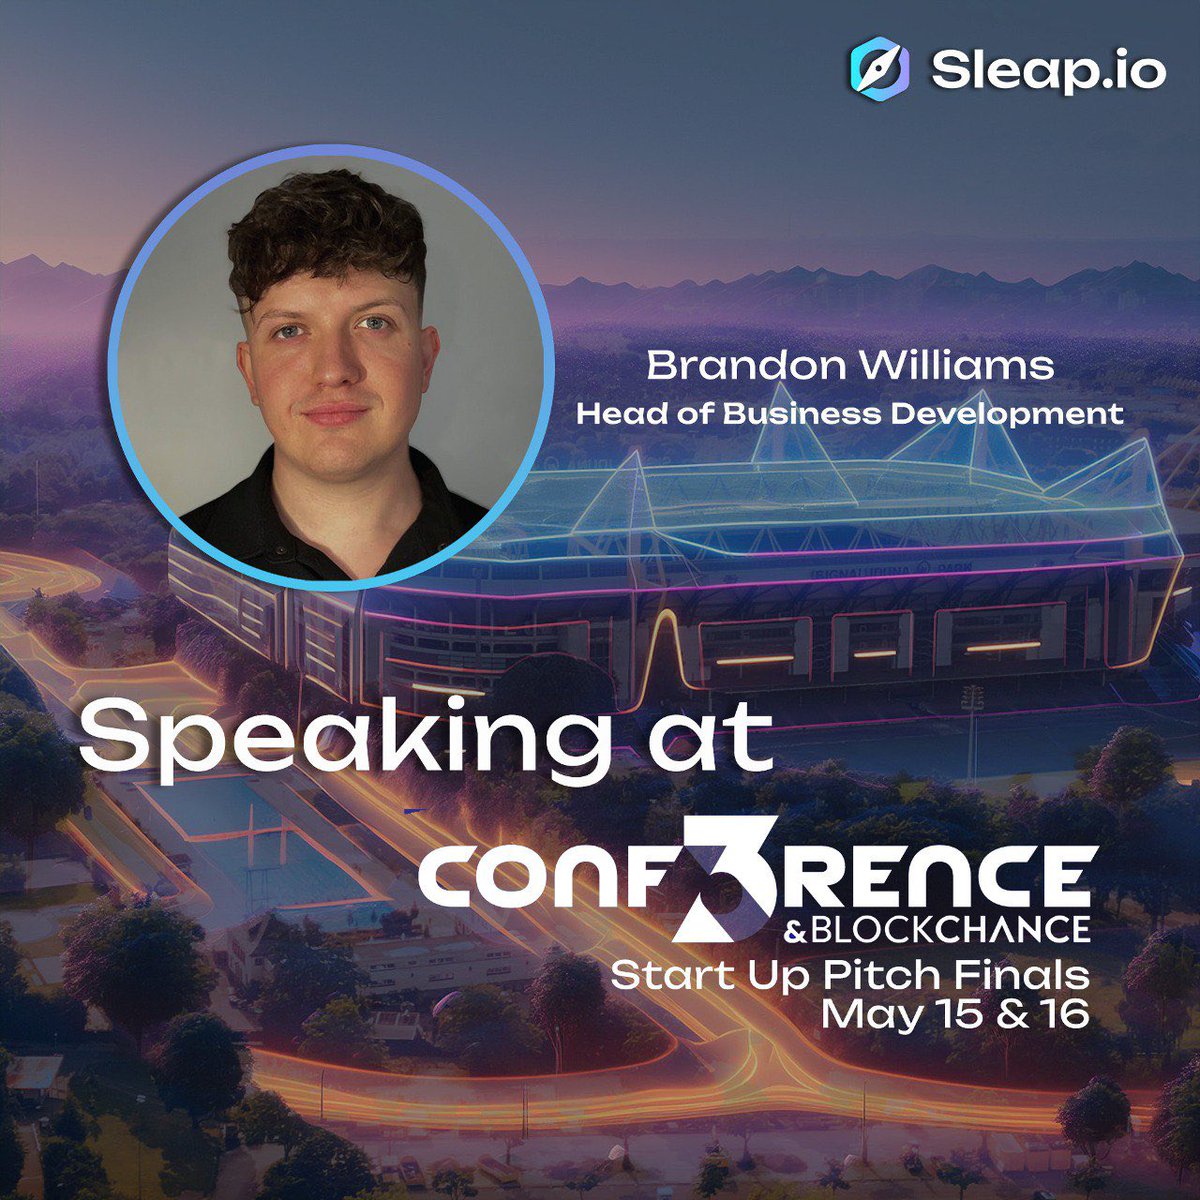 Don’t miss the Sleap.io team at @conf3rence , the largest Web3 conference in Germany. 🇩🇪 Head of business development @Brandon_i0 will be taking stage at 11:40am CET on the 15th of May in the Startup pitch finals.🗣️ Come find out how Sleap.io is